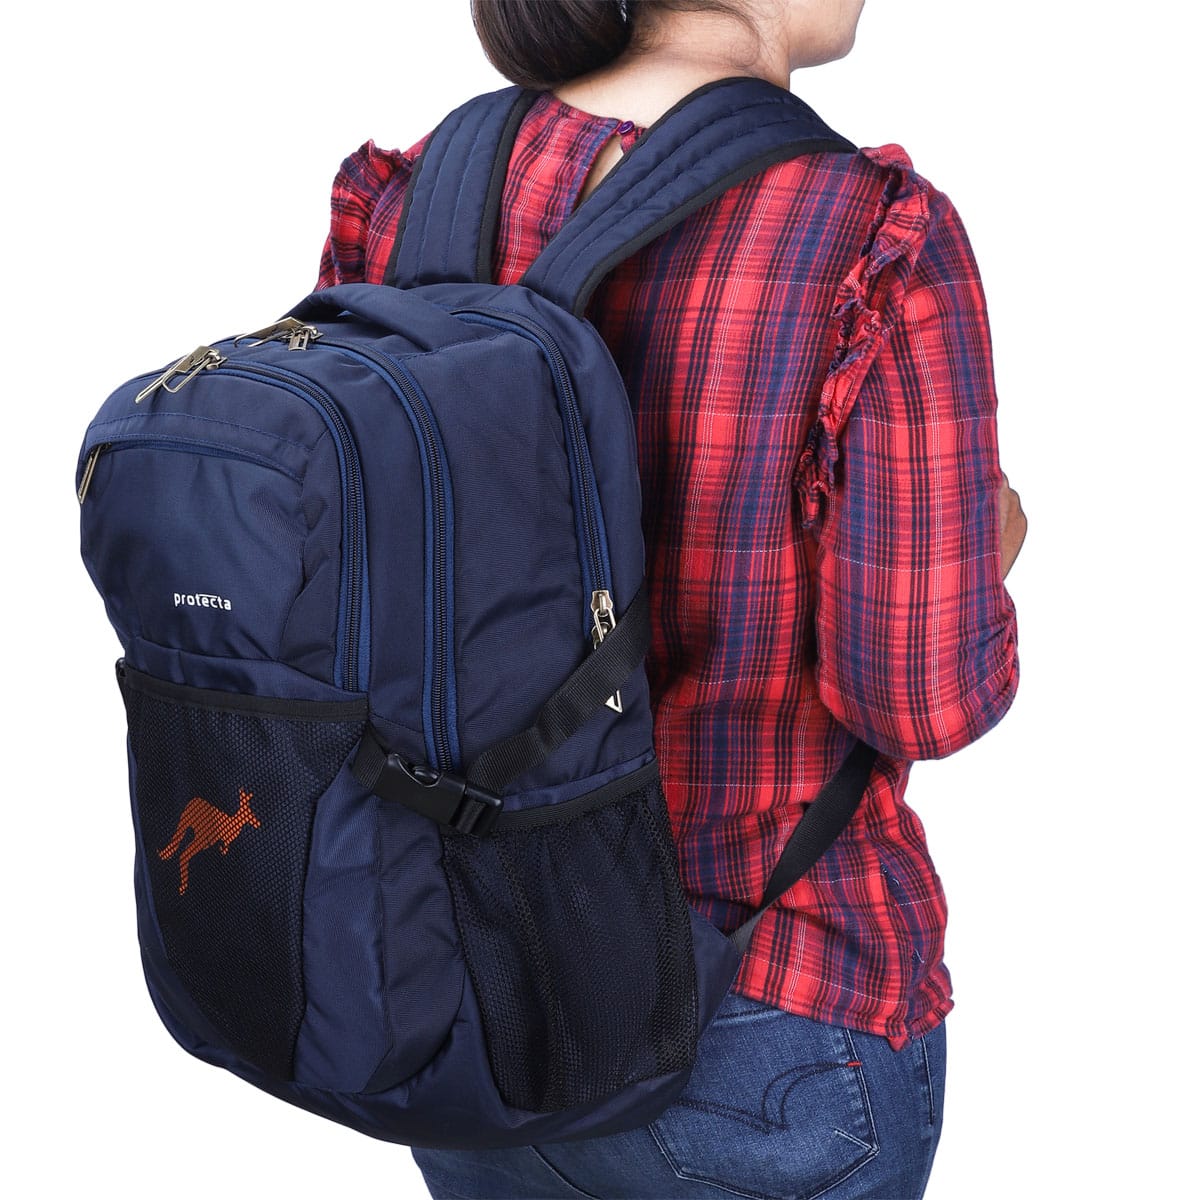 Navy | Protecta Enigma Laptop Backpack-6